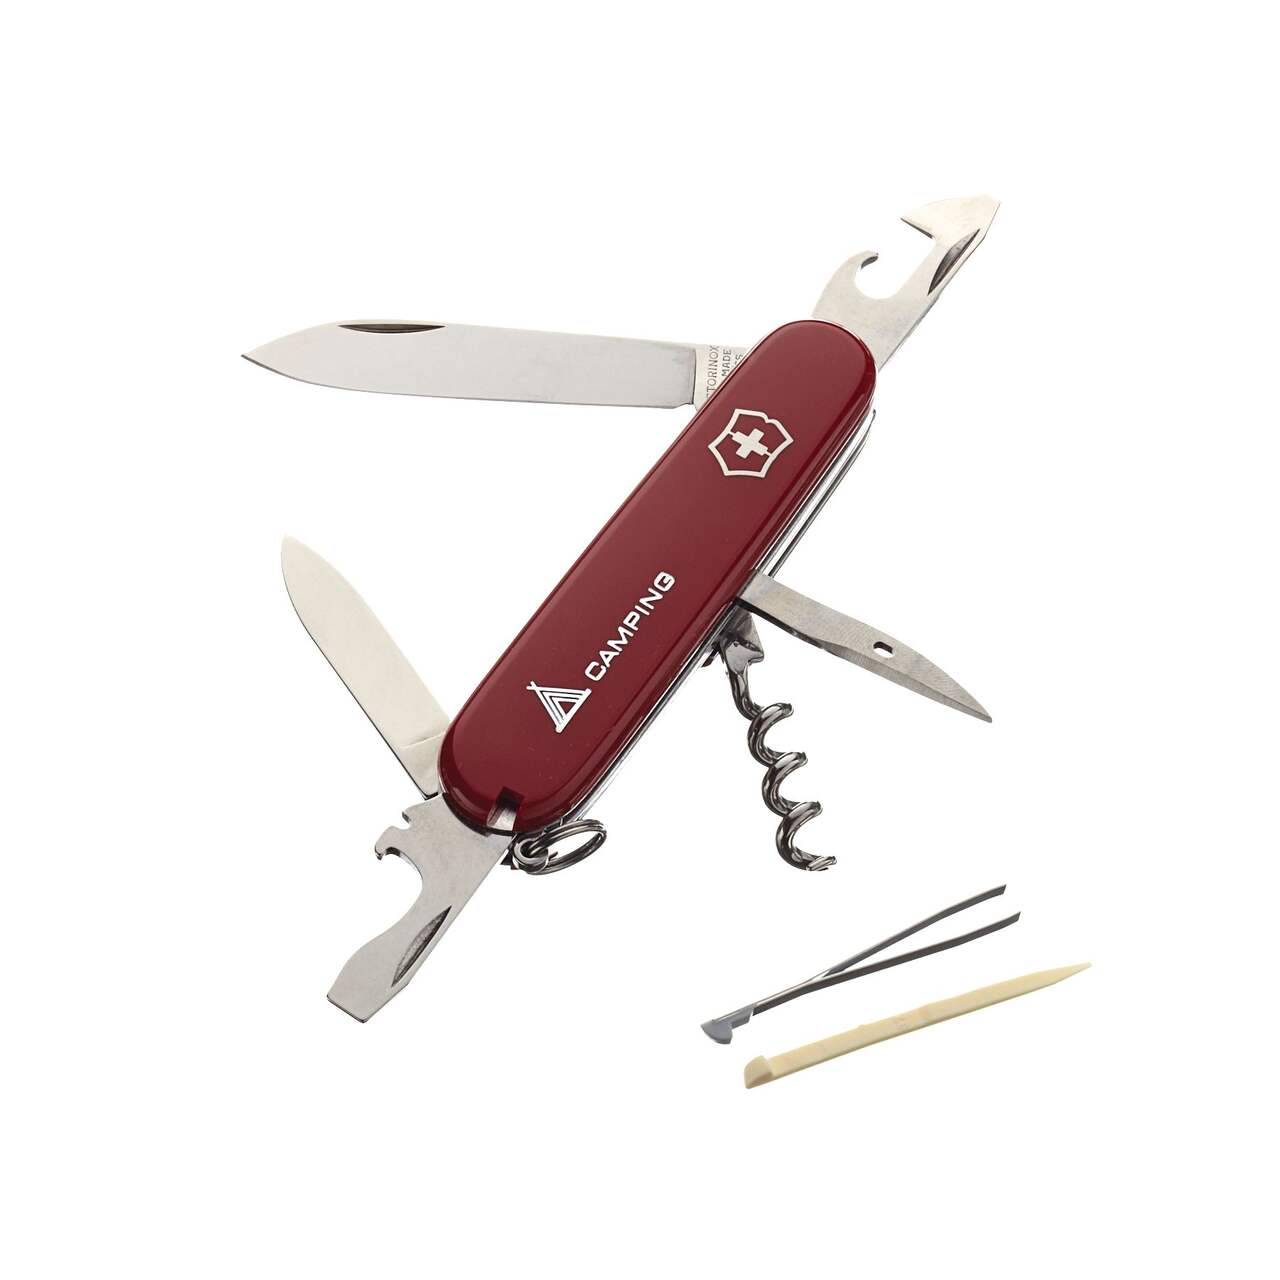 https://media-www.canadiantire.ca/product/playing/hunting/hunting-equipment/0753524/victorinox-swiss-army-camper-13-function-knife-6904ee17-9703-4496-8123-aded92e94cfc-jpgrendition.jpg?imdensity=1&imwidth=640&impolicy=mZoom